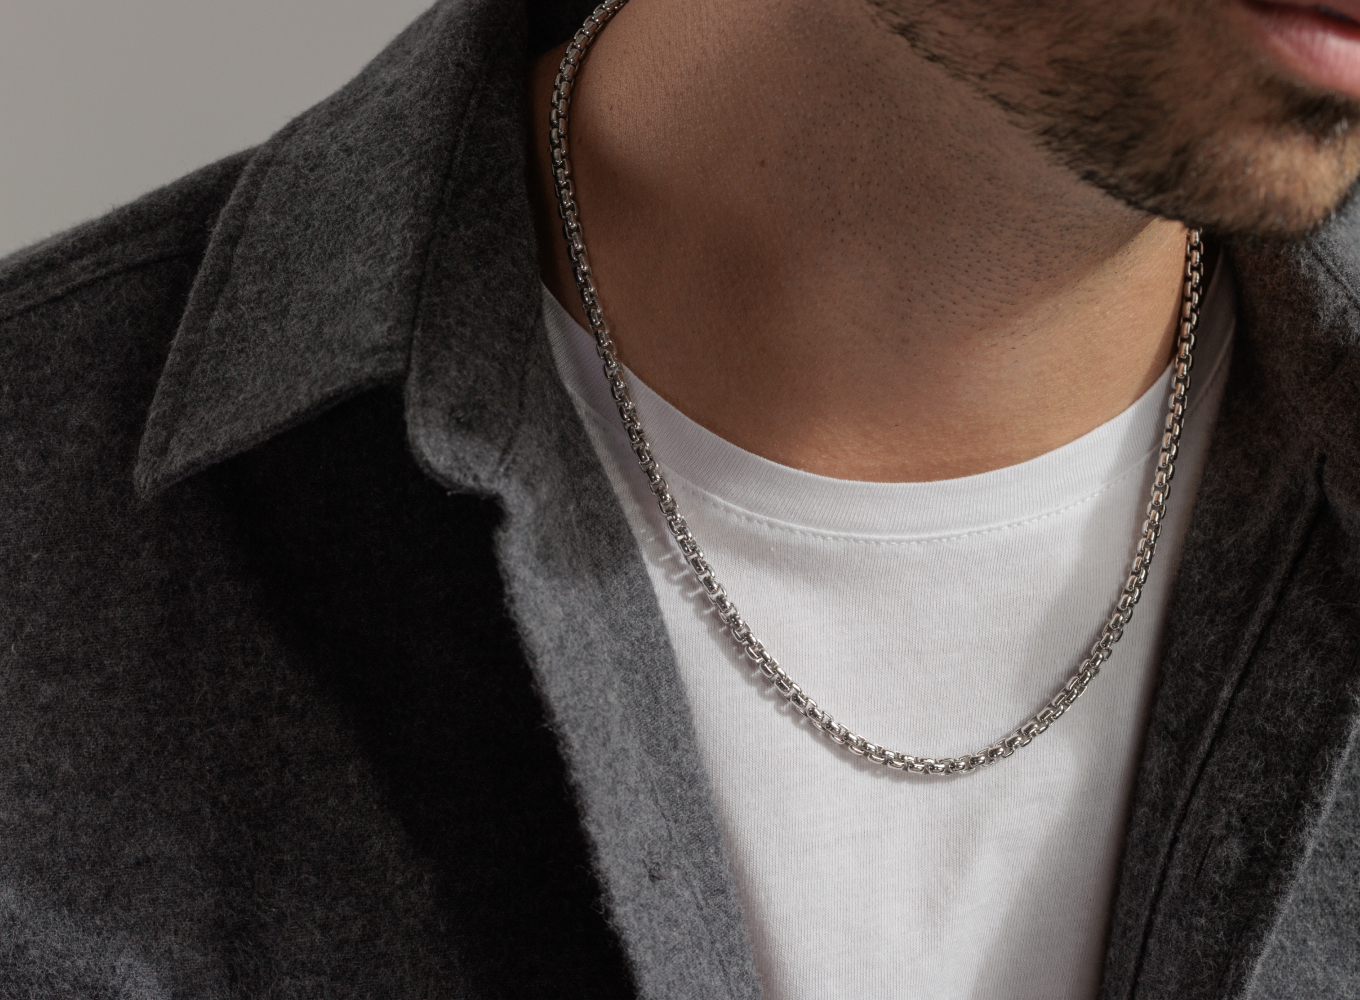 20 in Box Chain in Sterling Silver (4mm) This bright sterling silver box chain complements any look. The lobster clasp has a locking lever mechanism that will hold this necklace securely in place.